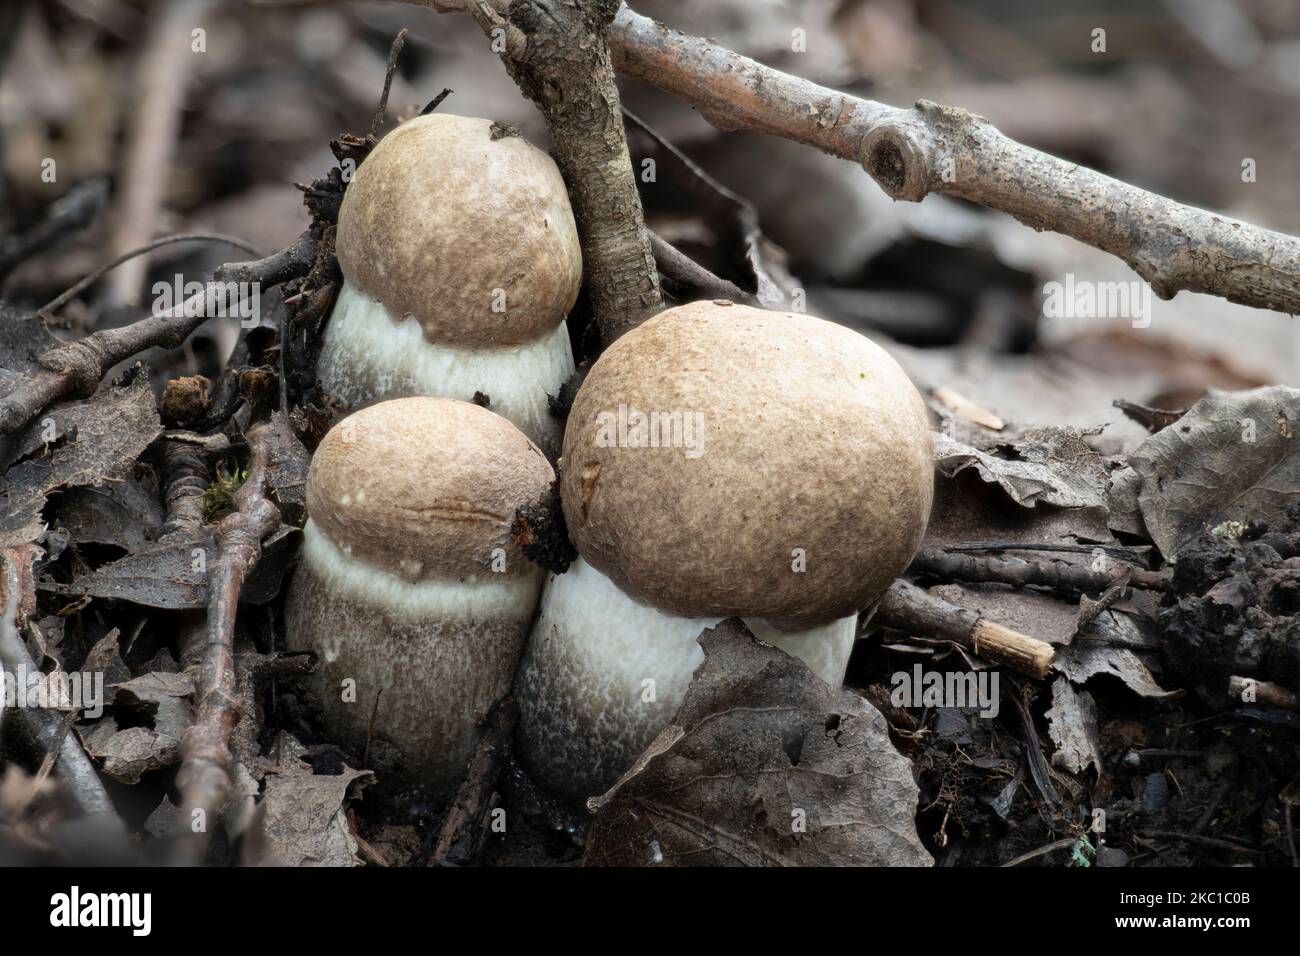 A group of young Leccinum duriusculum mushrooms under aspen trees Stock Photo